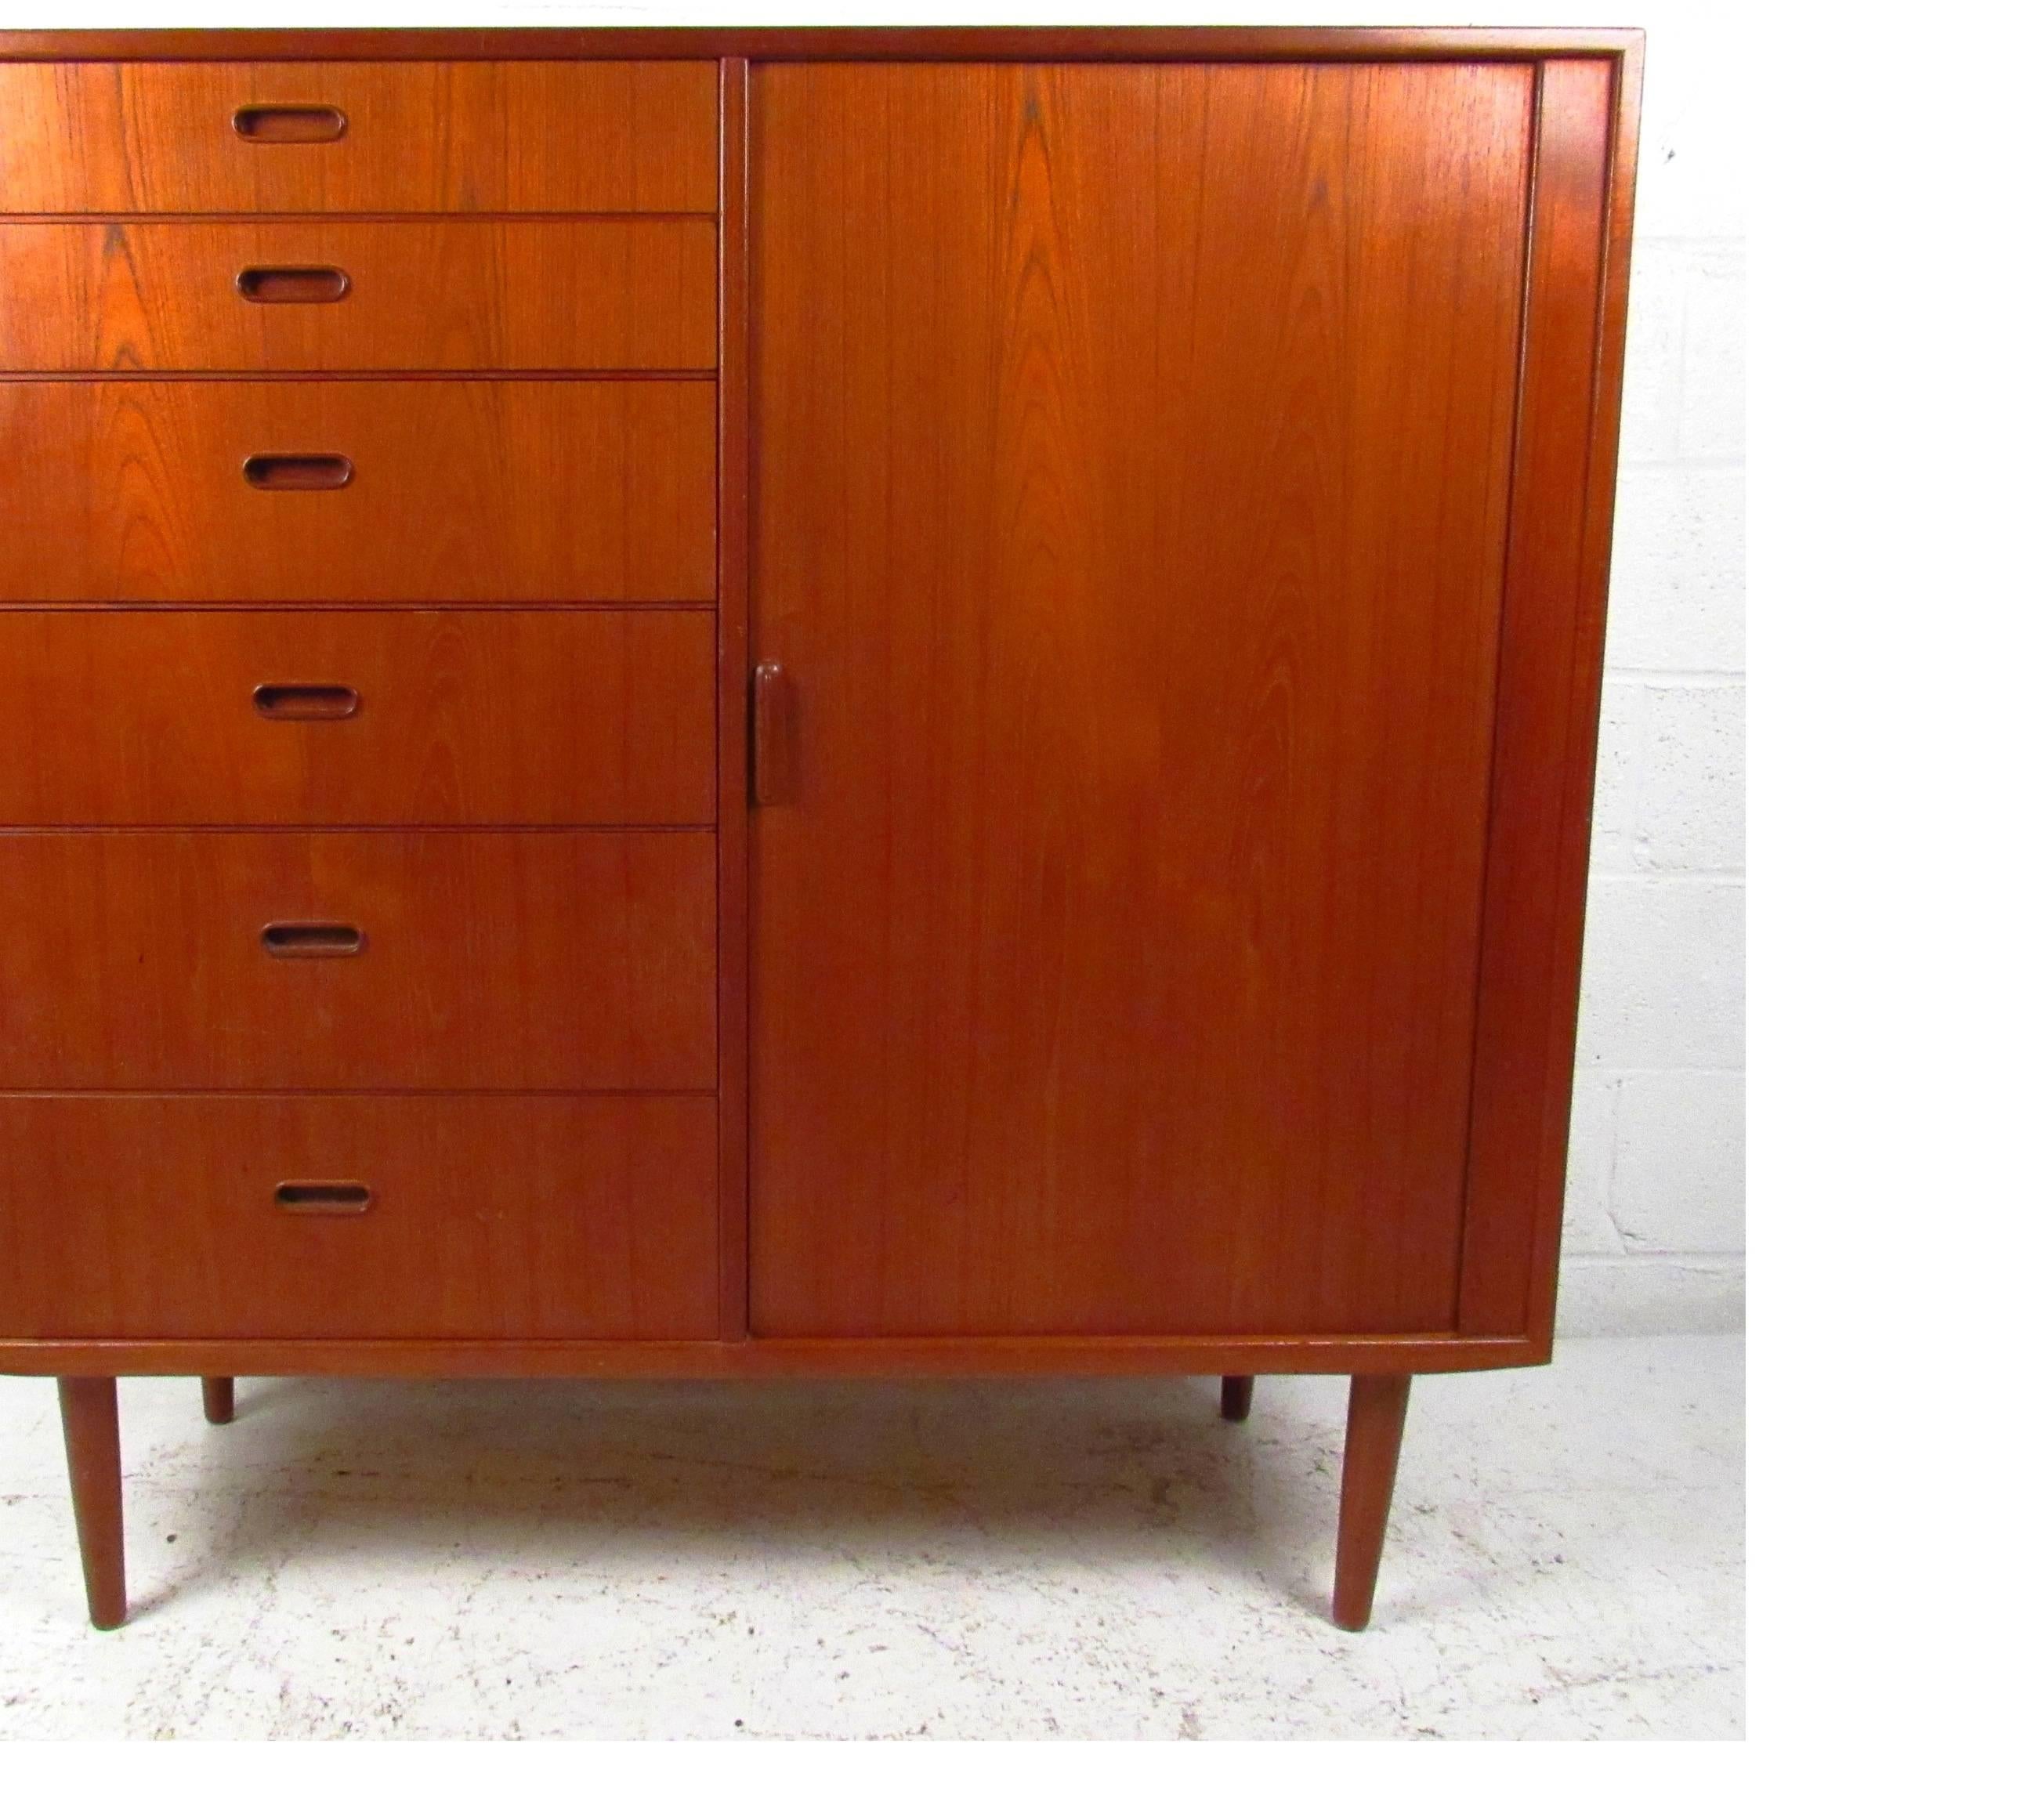 Well designed 12-drawer teak dresser with tambour door by Falster Mobelfabrik offers spacious storage drawers in any setting. Please confirm item location (NY or NJ) with dealer.